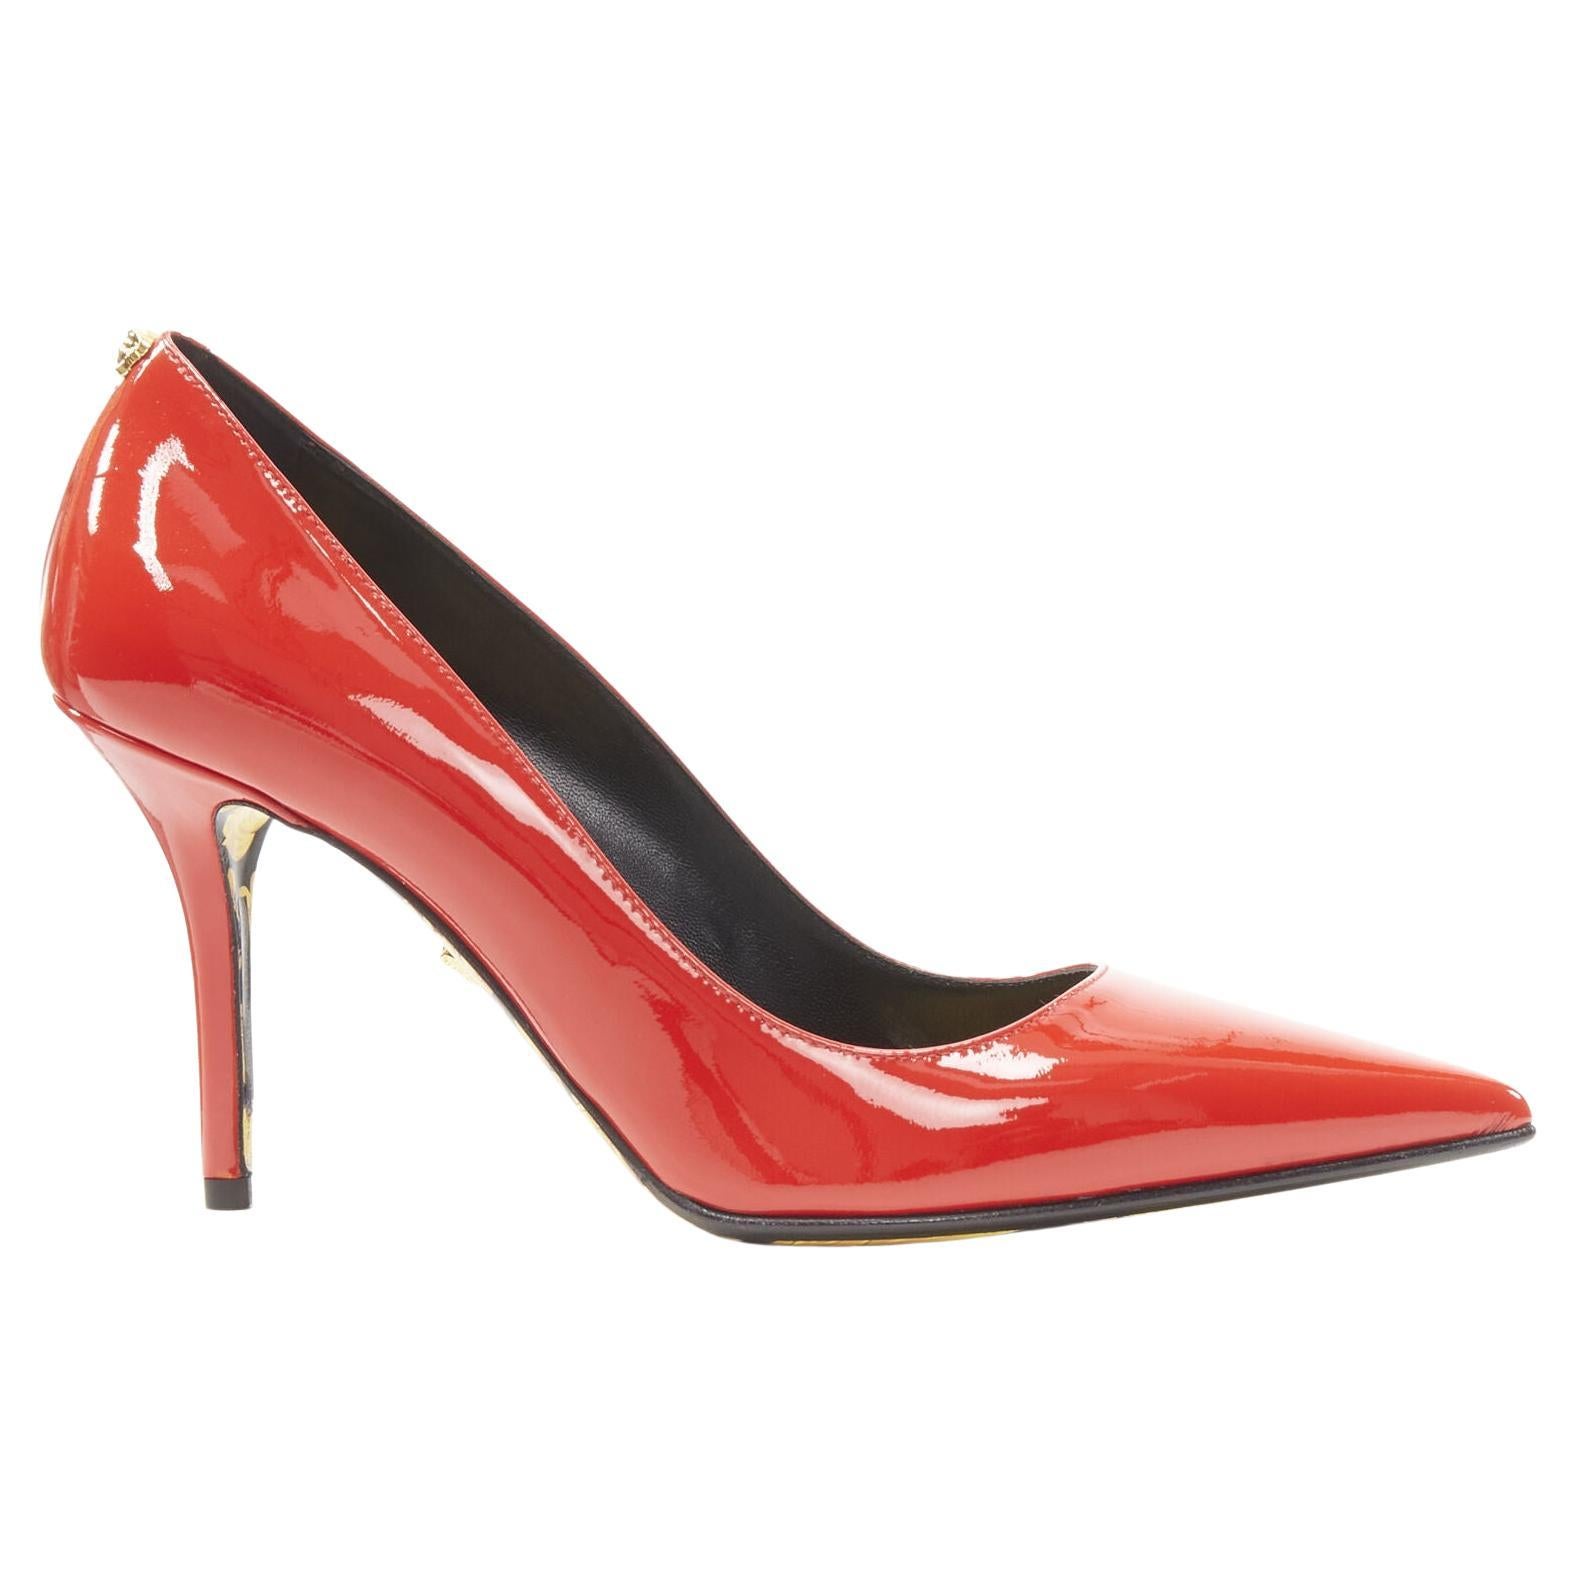 new VERSACE Hibiscus Barocco gold sole red patent Medusa stud pump EU38.5 For Sale